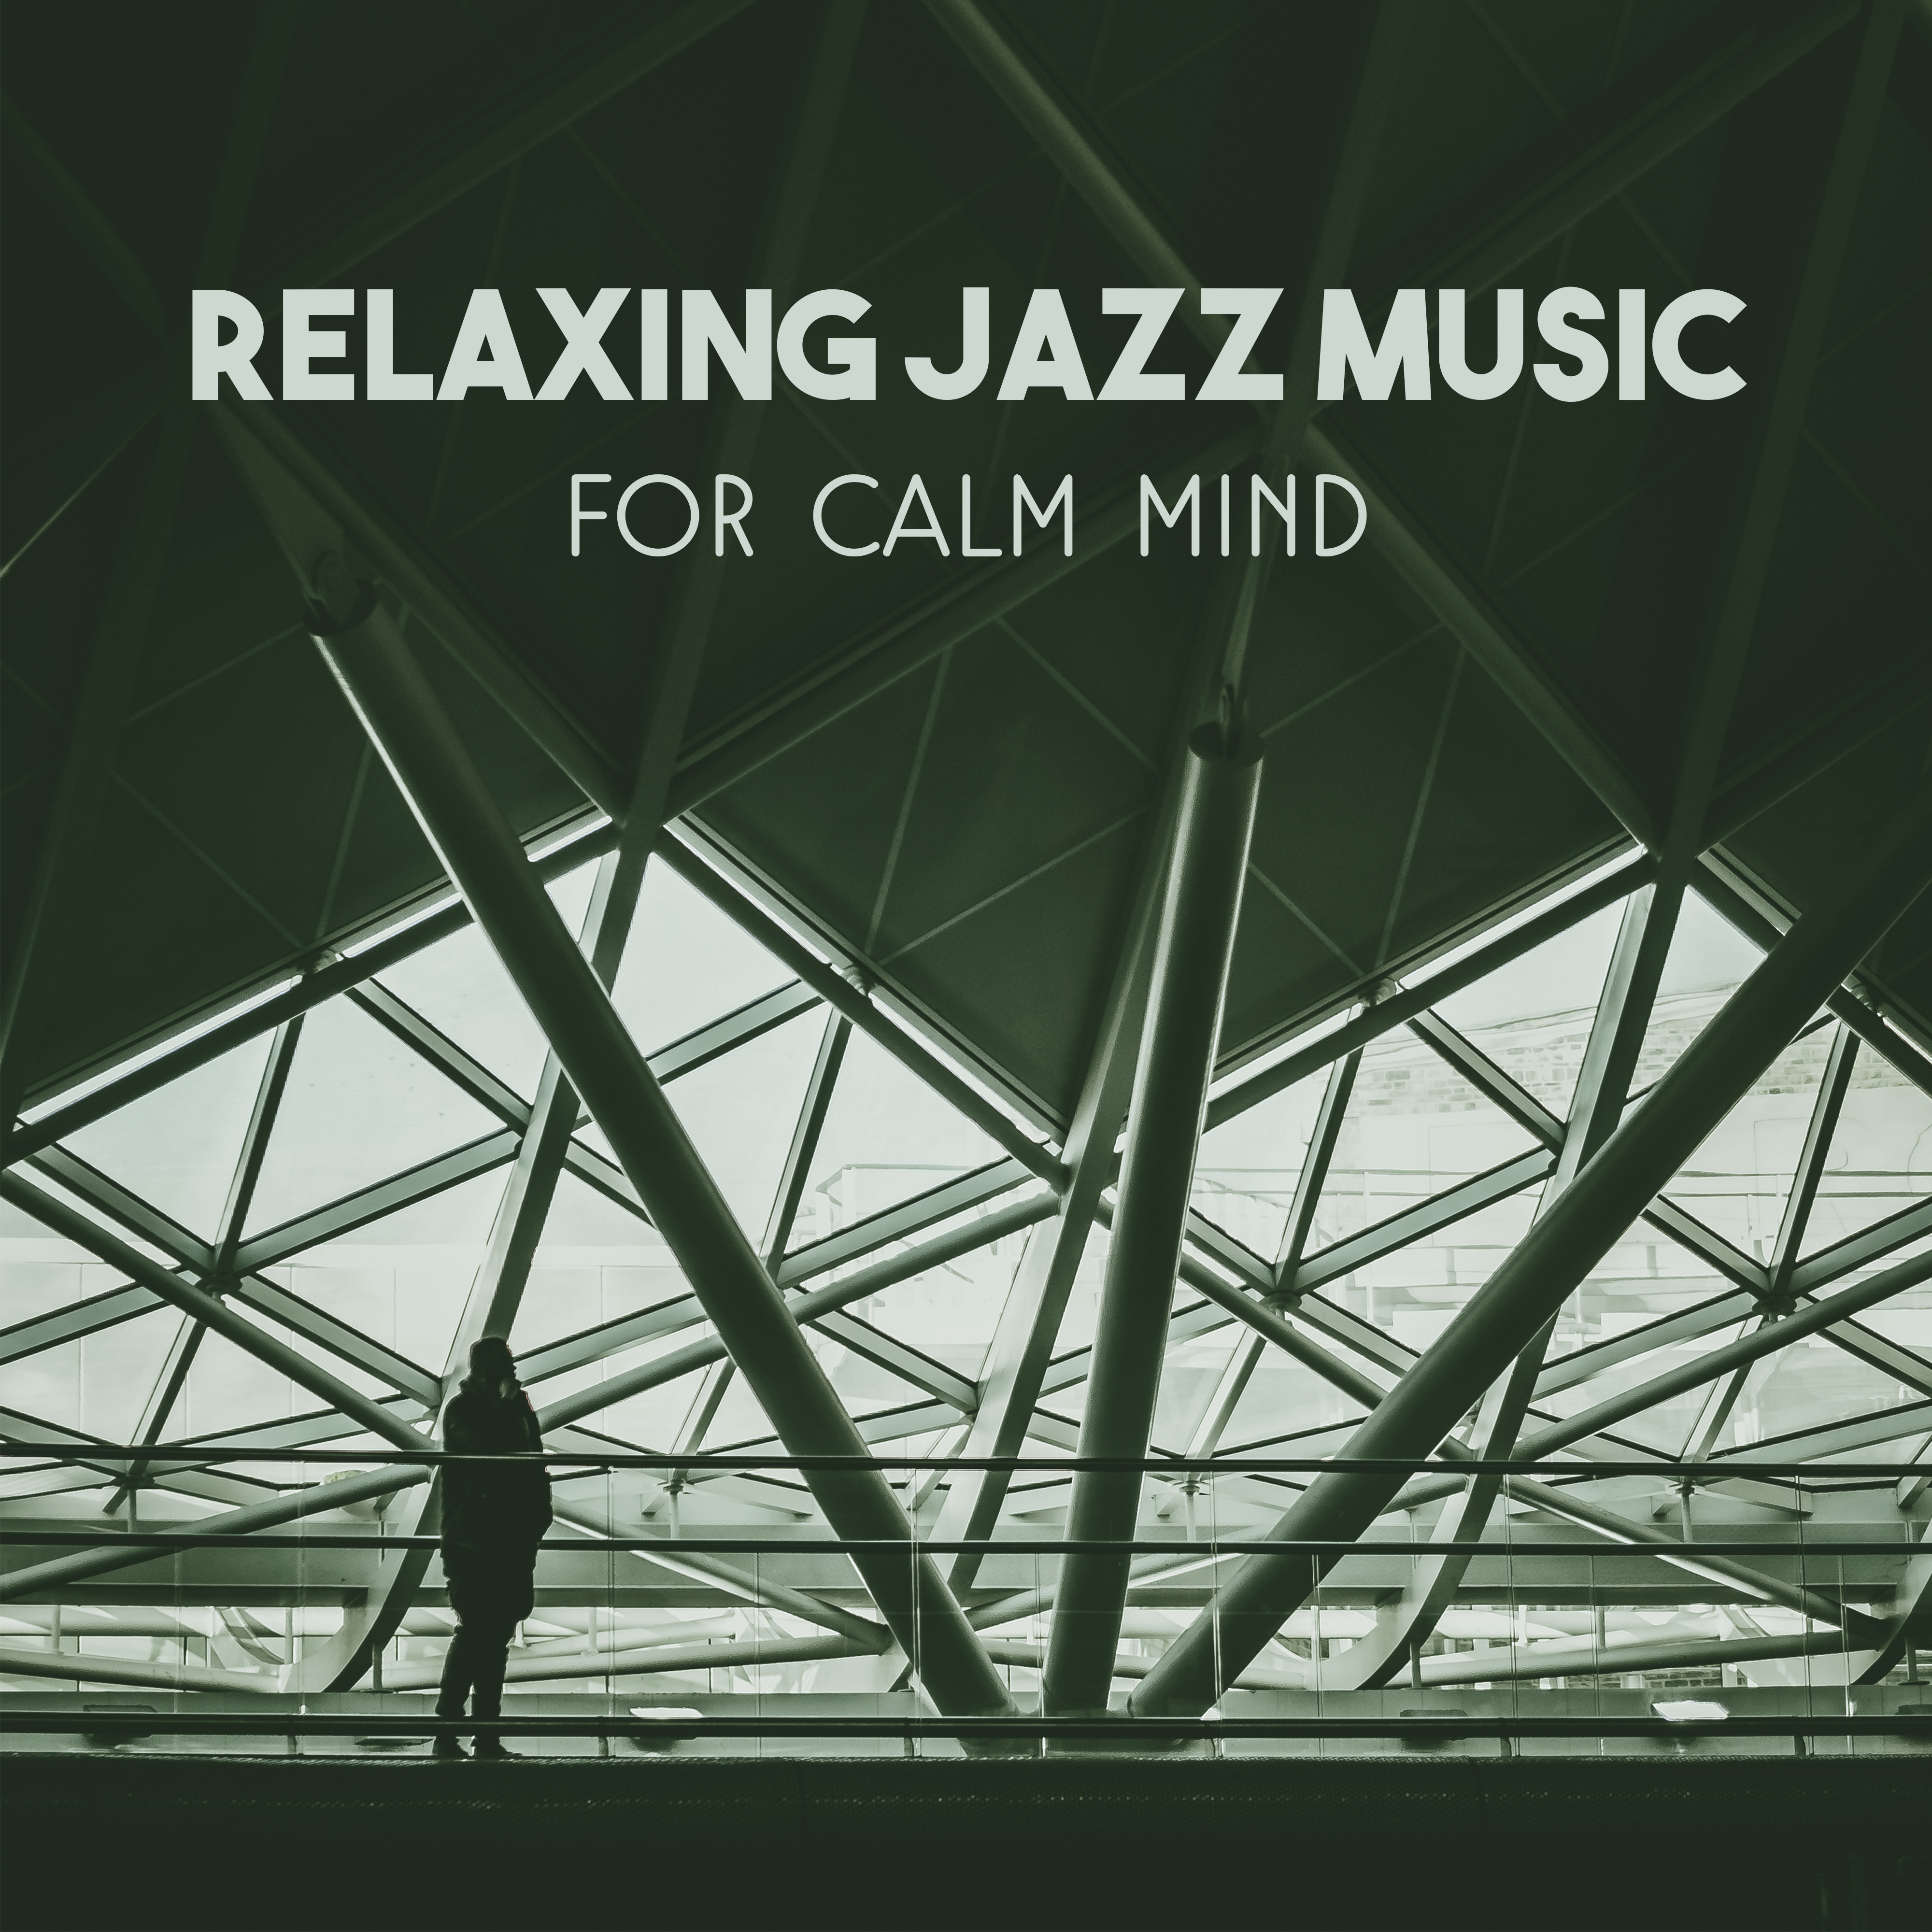 Relaxing Jazz Music for Calm Mind – Soothing Jazz Music, Rest Sounds, Jazz Club, Moonlight Piano